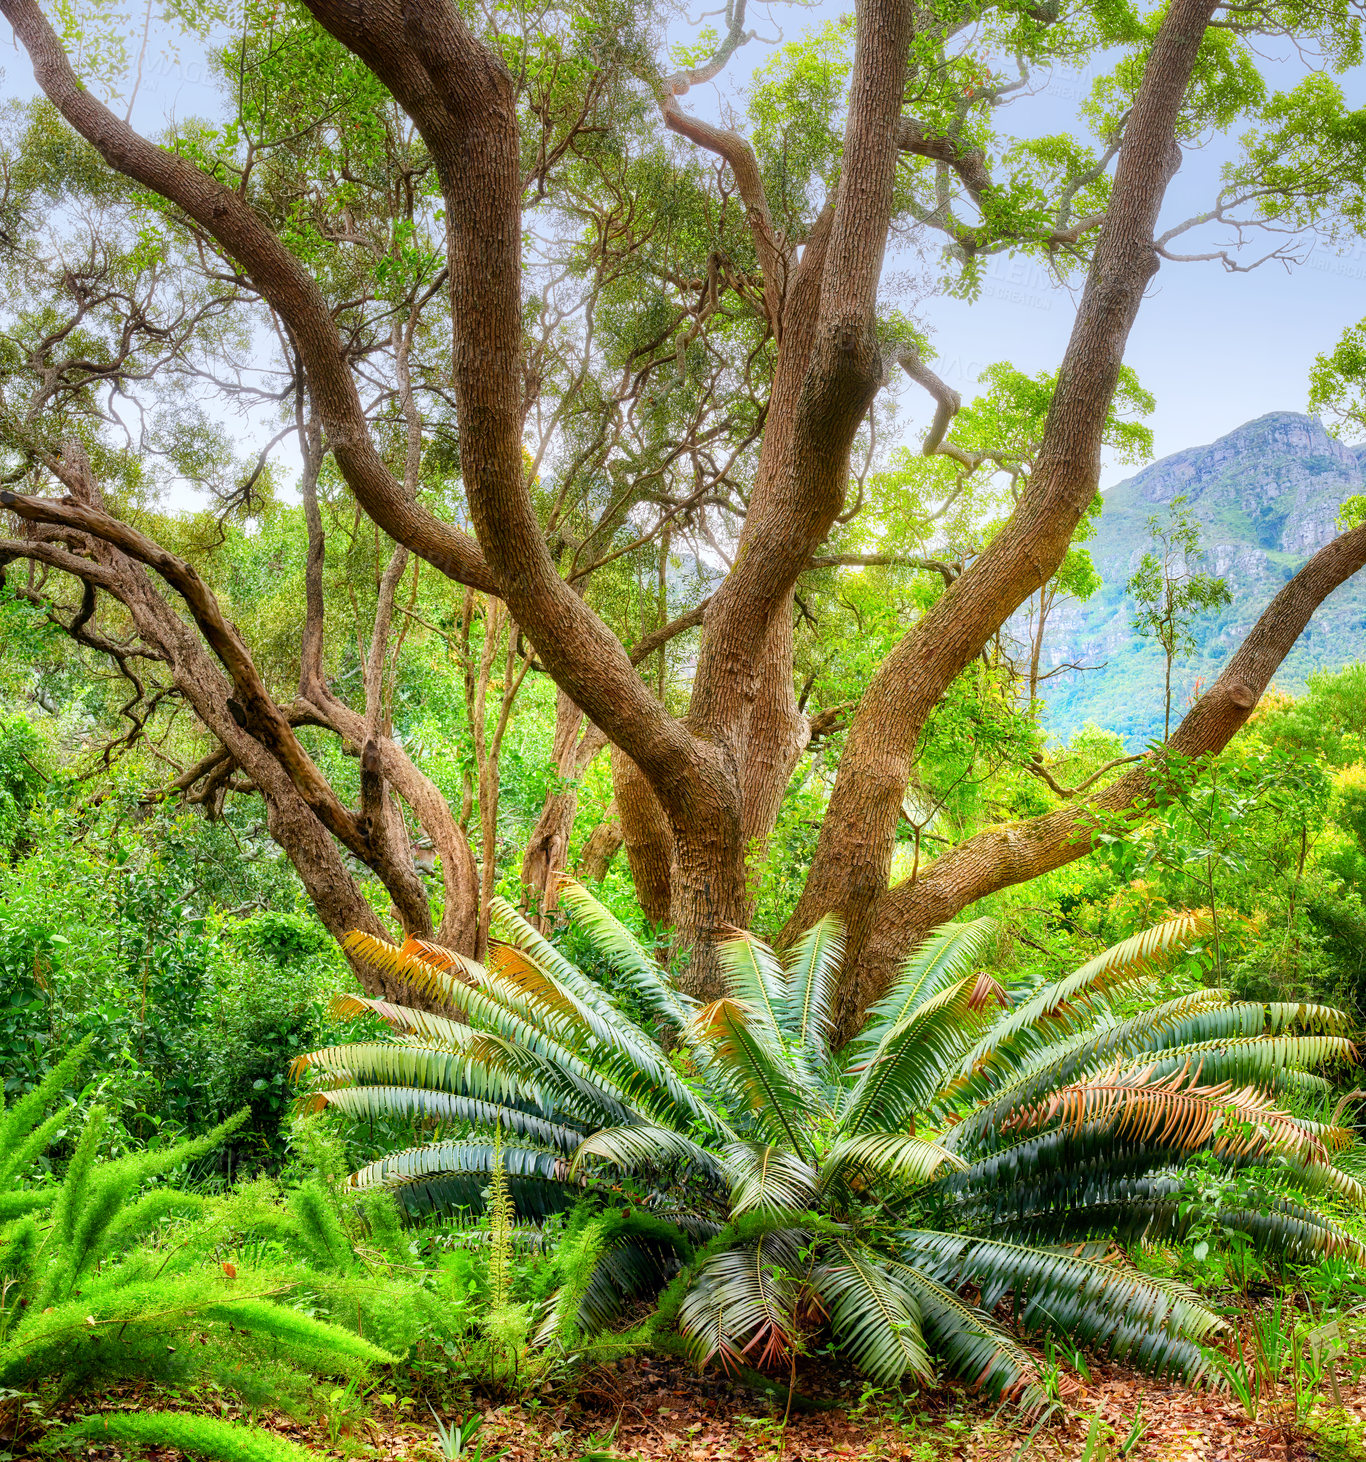 Buy stock photo Flowers, plants and trees in Kirstenbosch Botanical Gardens in Cape Town, South Africa. Landscape view of a beautiful and unique tree growing with greenery and vegetation in a popular tourist city 